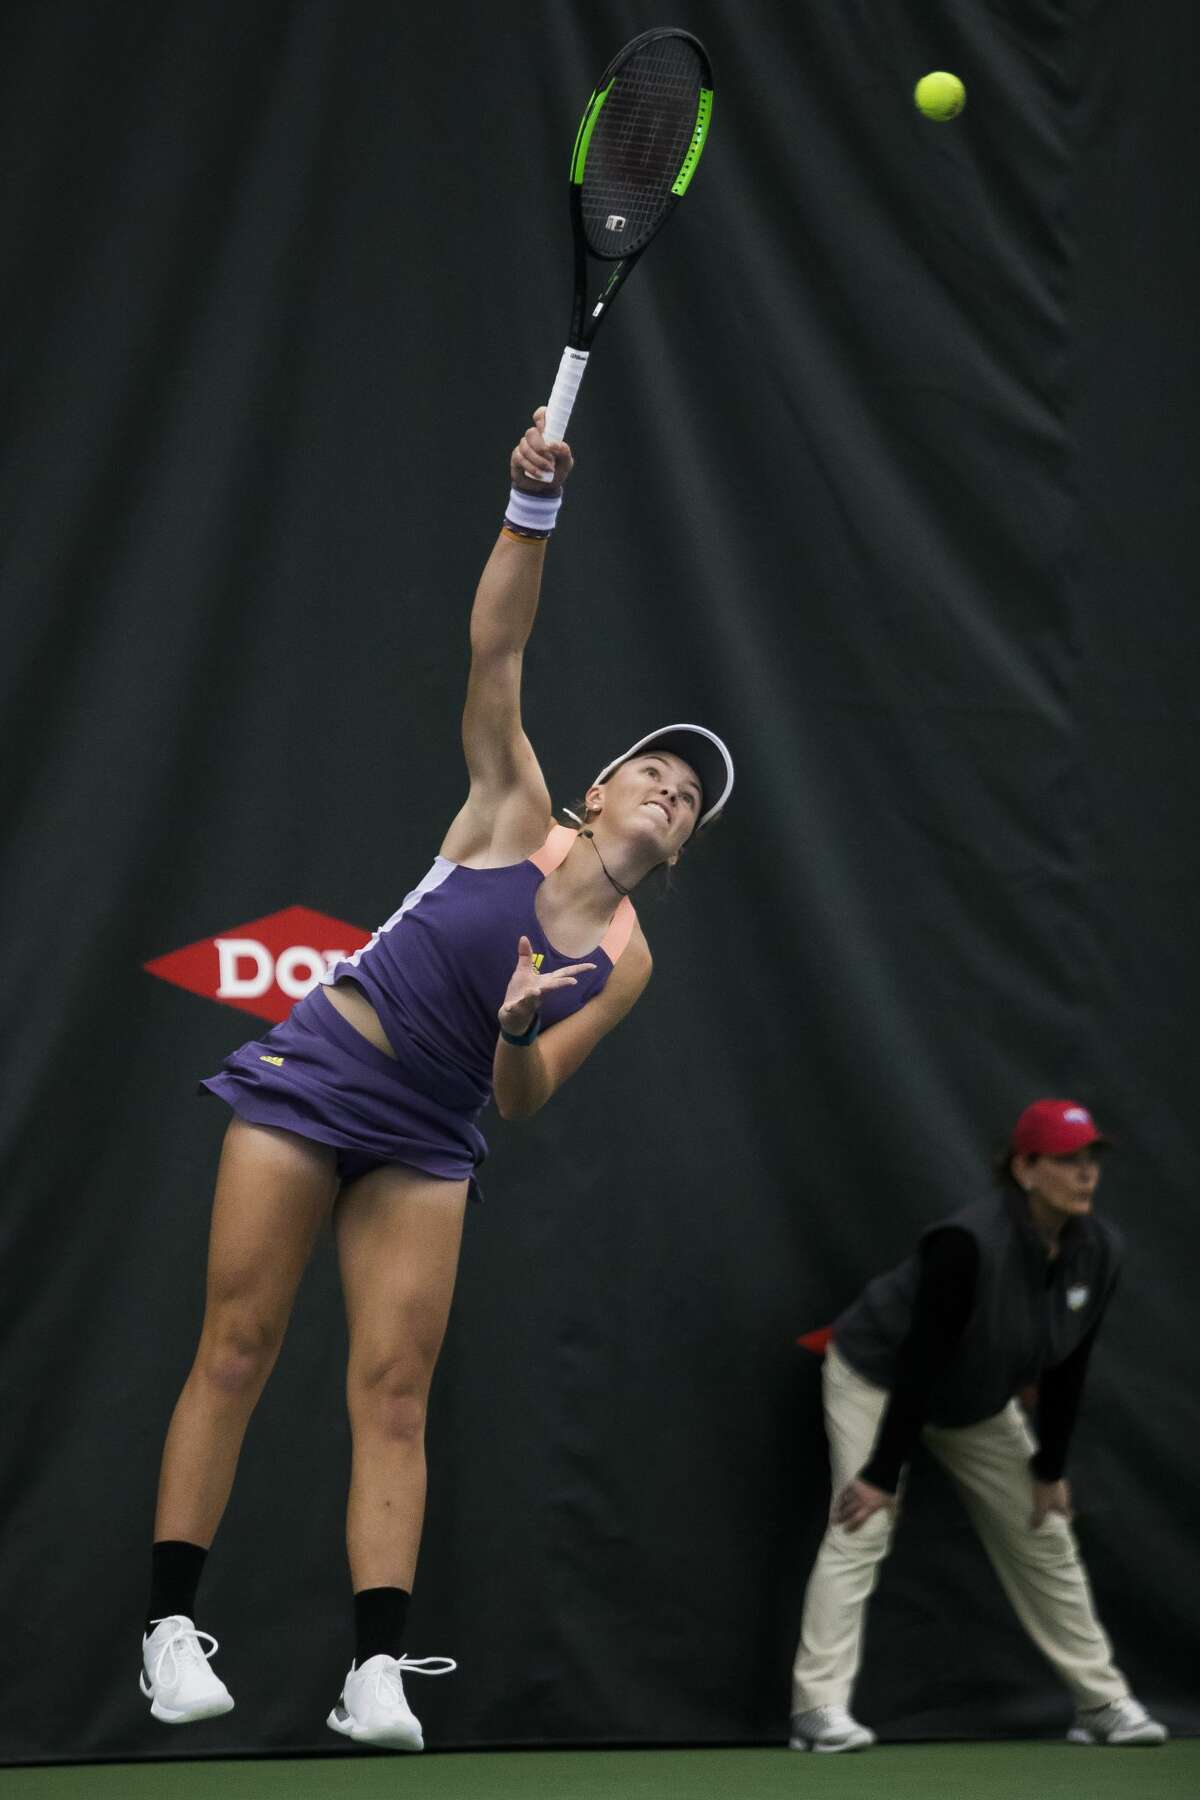 Ellie Coleman of Midland serves the ball in a match against Yanina Wickmayer of Belgium during the Dow Tennis Classic Tuesday, Feb. 4, 2020. (Katy Kildee/kkildee@mdn.net)